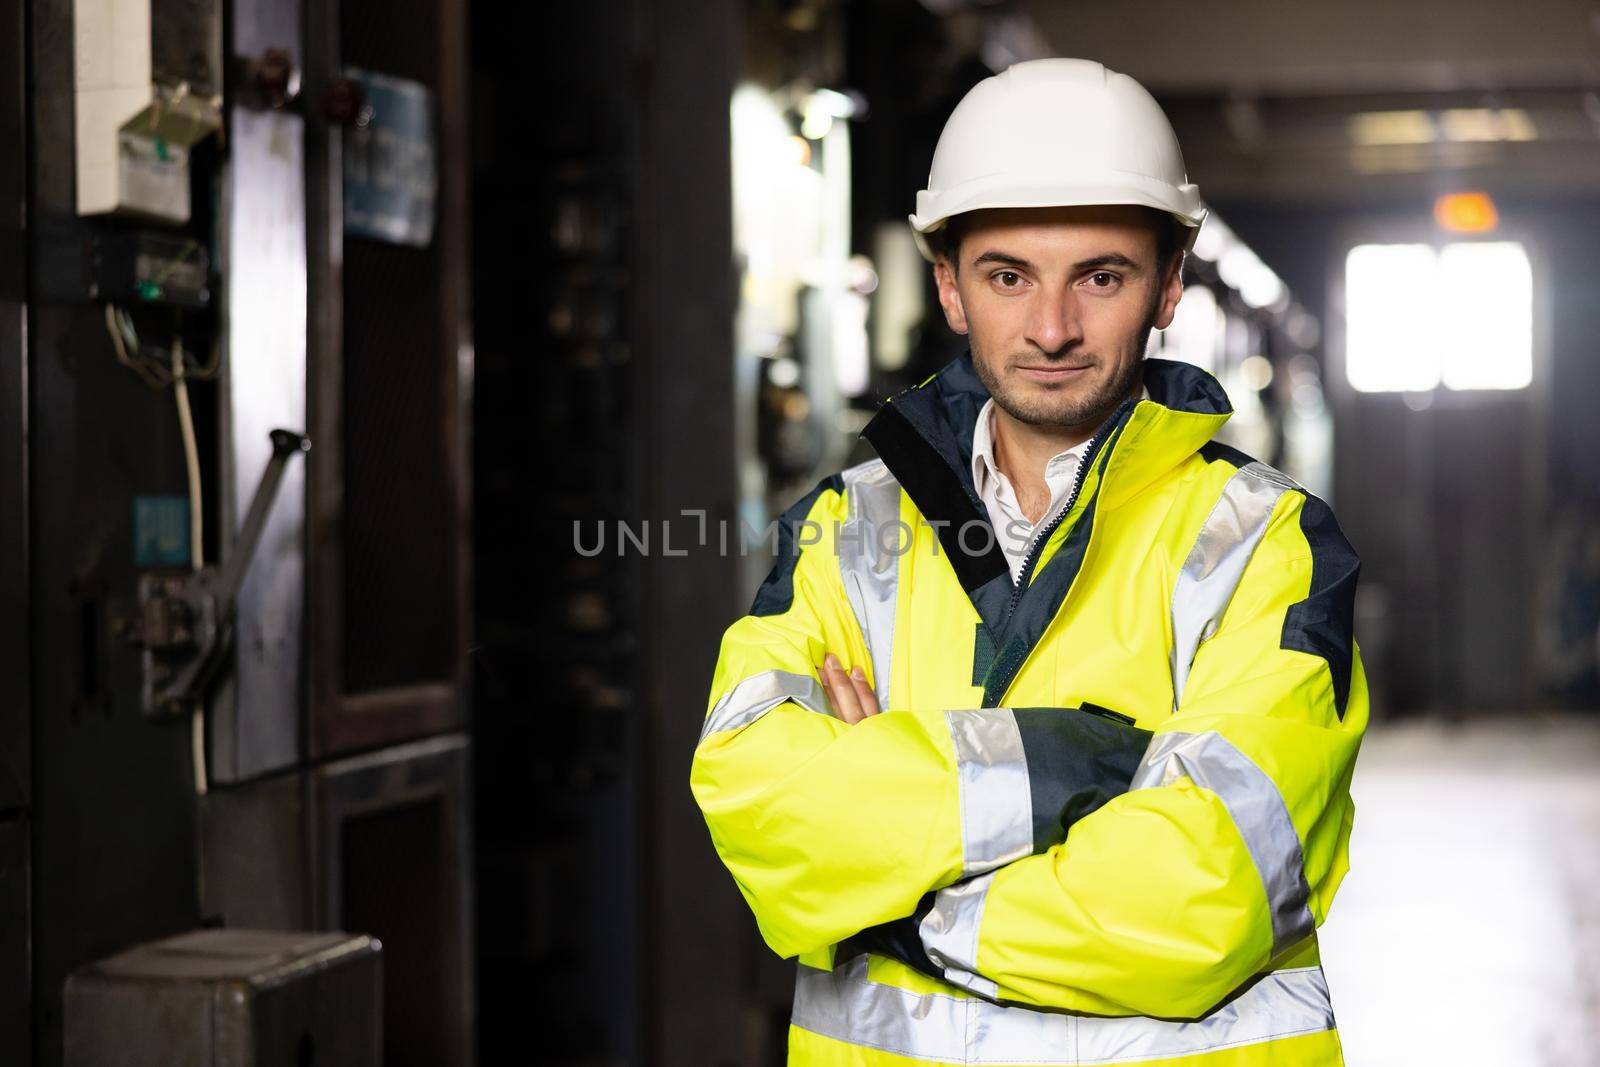 Portrait of young factory engineer or worker wearing safety vest and hard hat crossing arms at electrical control room . Industry and engineering concept.